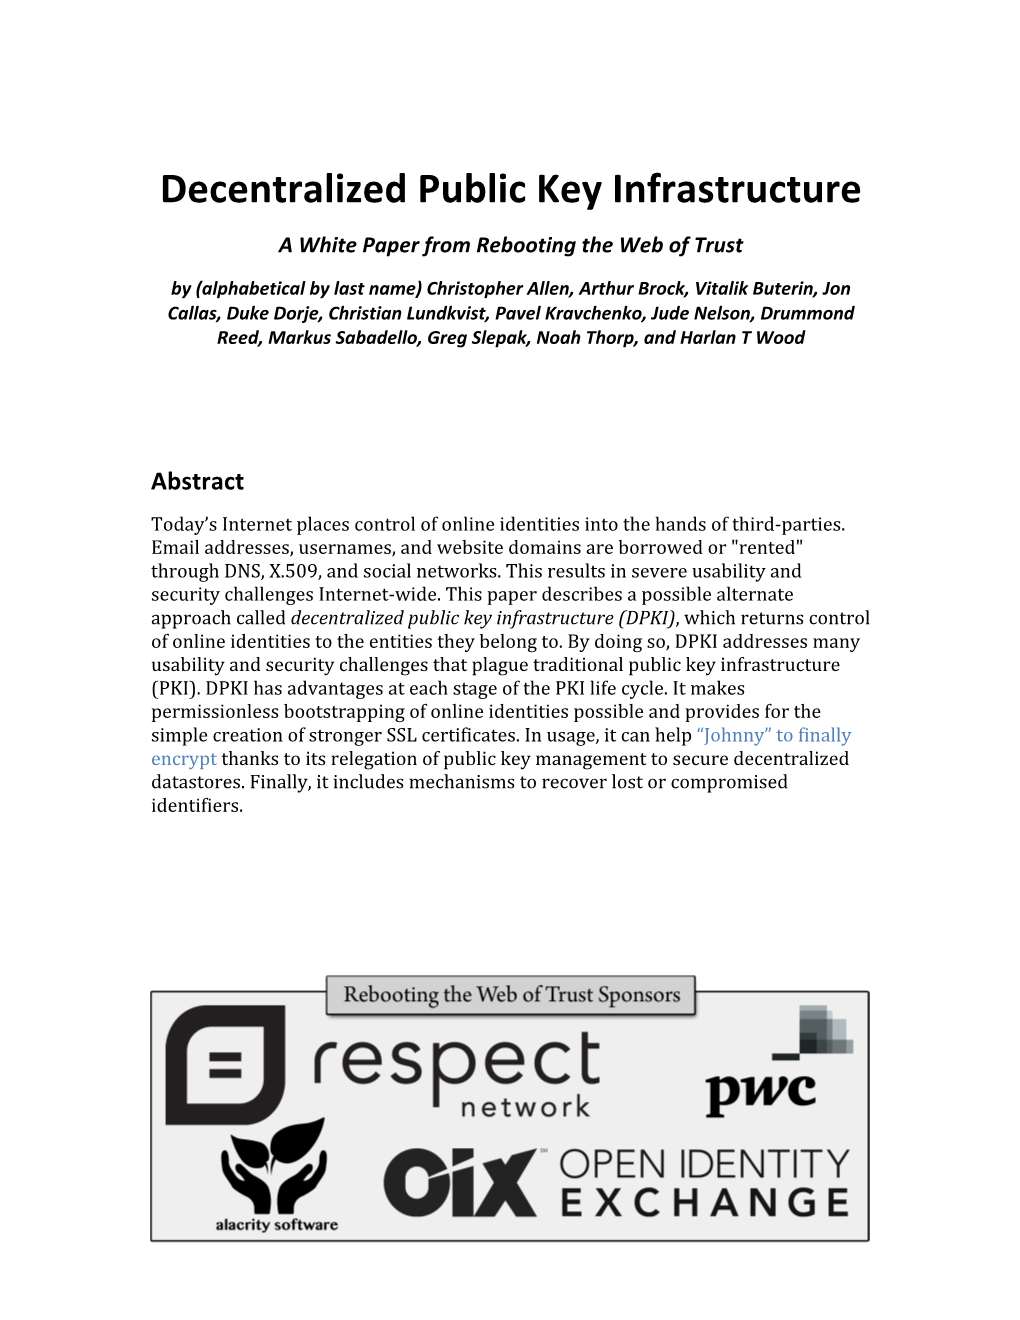 Decentralized Public Key Infrastructure (DPKI), Which Returns Control of Online Identities to the Entities They Belong To